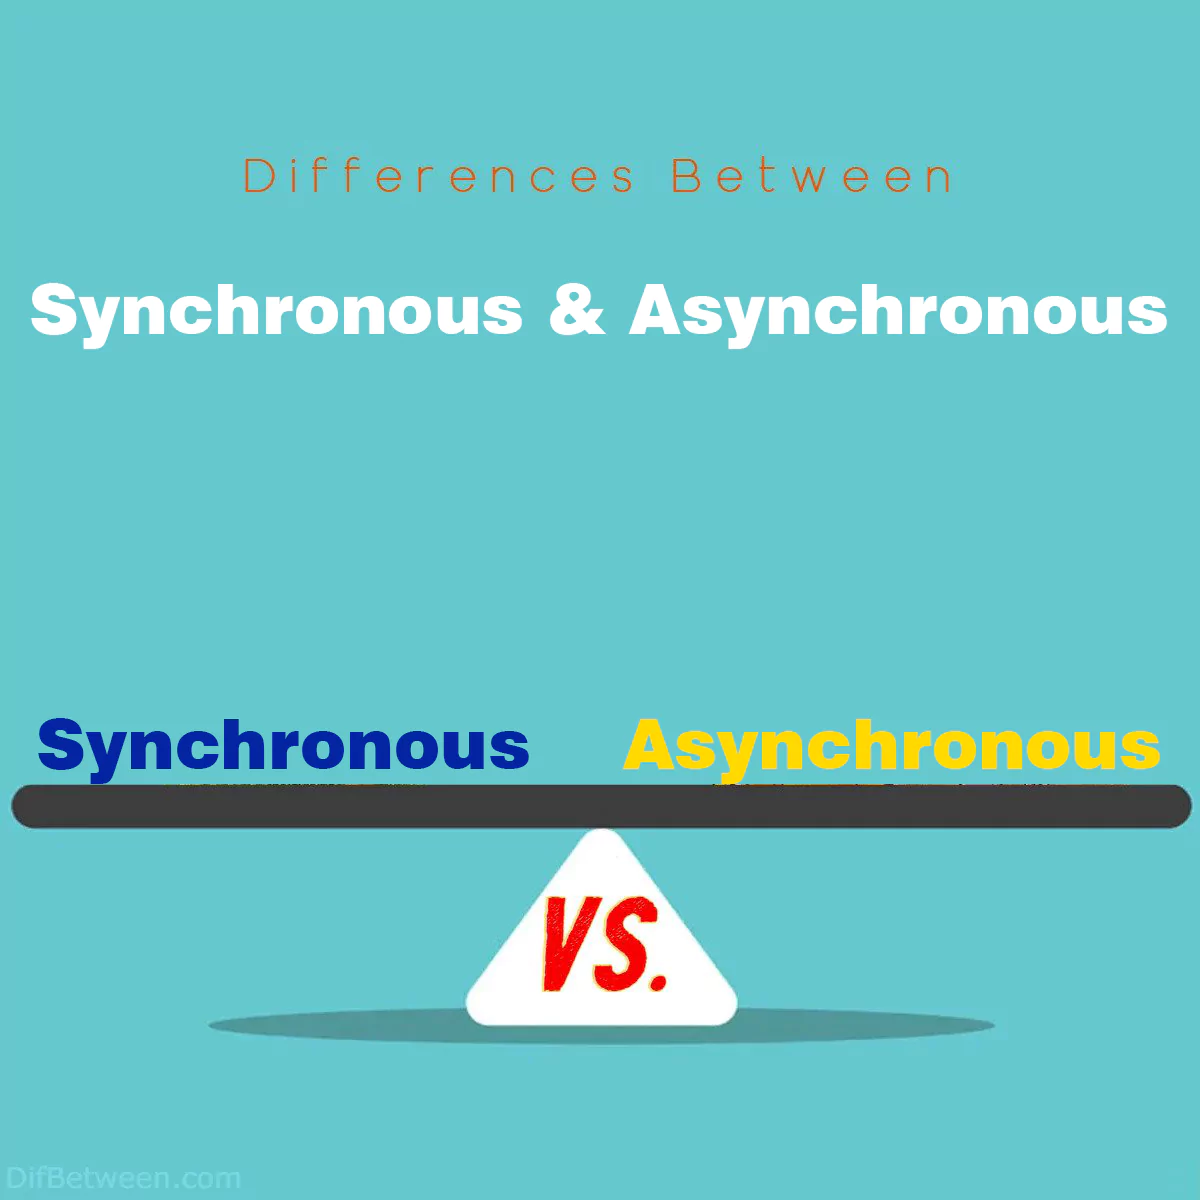 Differences Between Synchronous and Asynchronous Learning